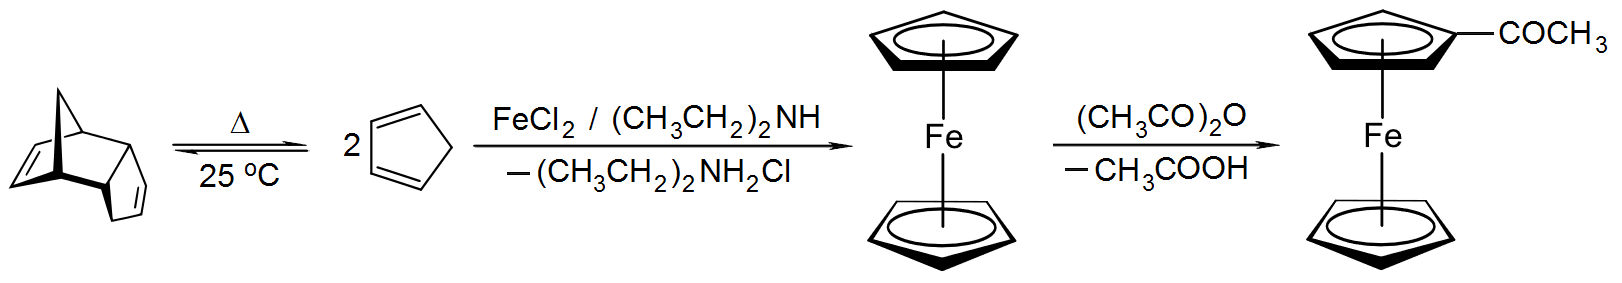 Synthesis of acetylferrocene from dicyclopentadiene.png. 